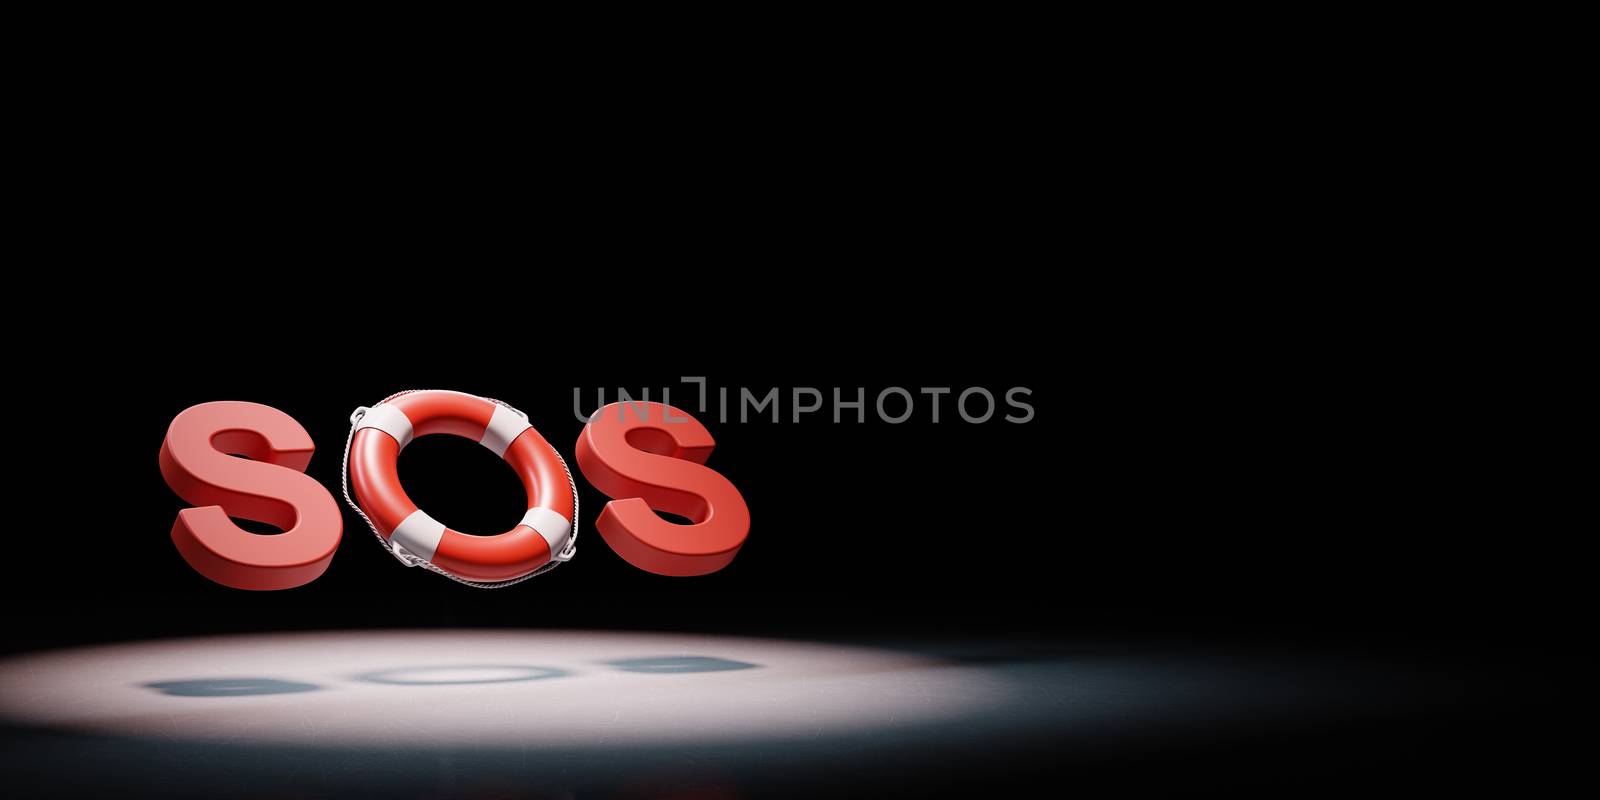 SOS Text with Red and White Lifebelt Spotlighted on Black Background with Copy Space 3D Illustration